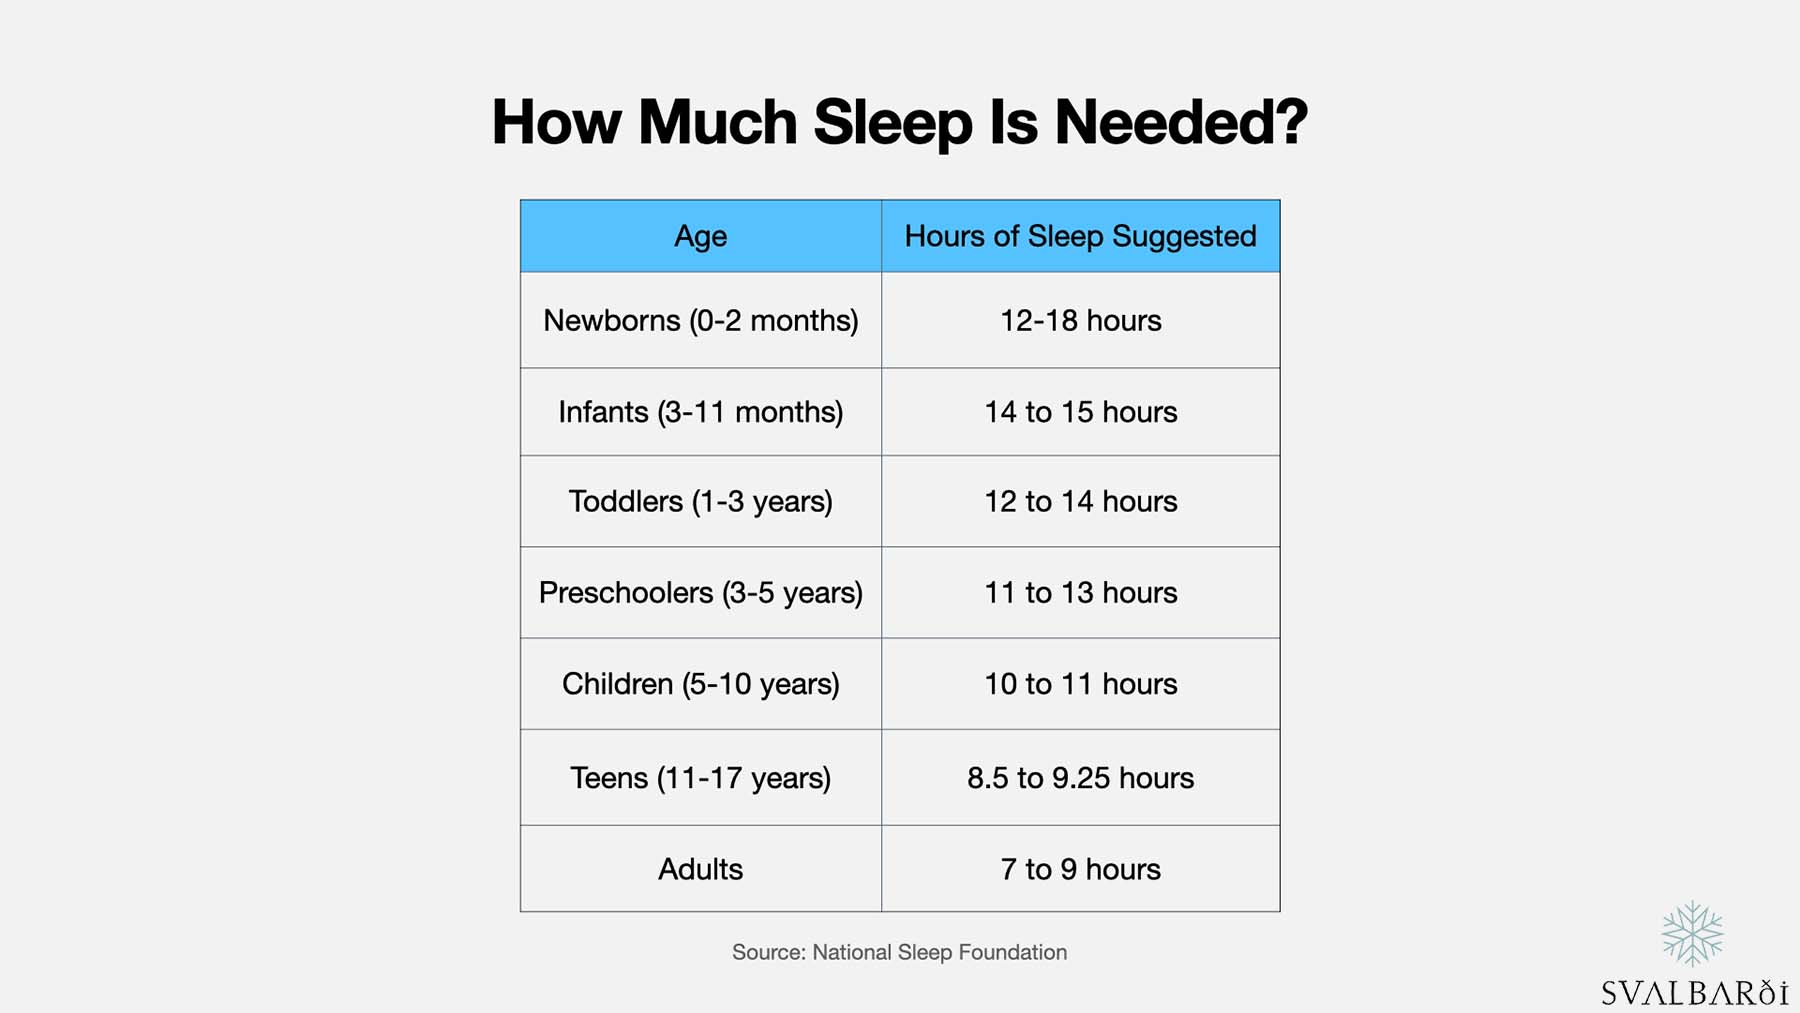 Suggested Hours of Sleep for Adults